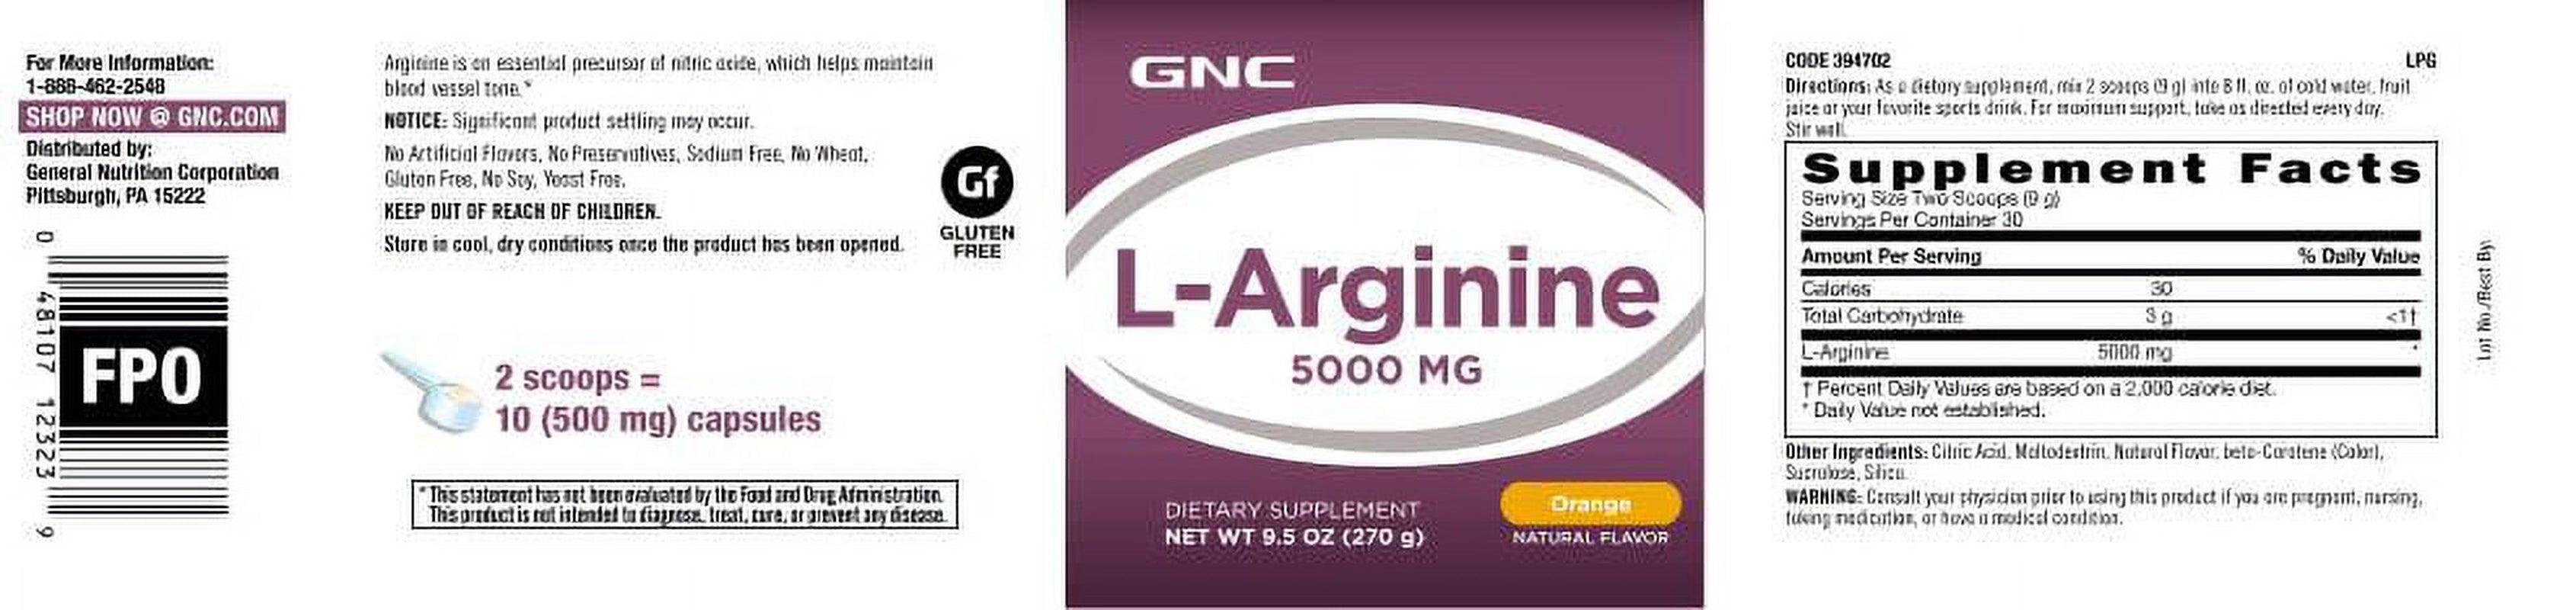 GNC L-Arginine 5000Mg - Orange, Twin Pack, 30 Servings per Container, Increases Nitric Oxide Productioin